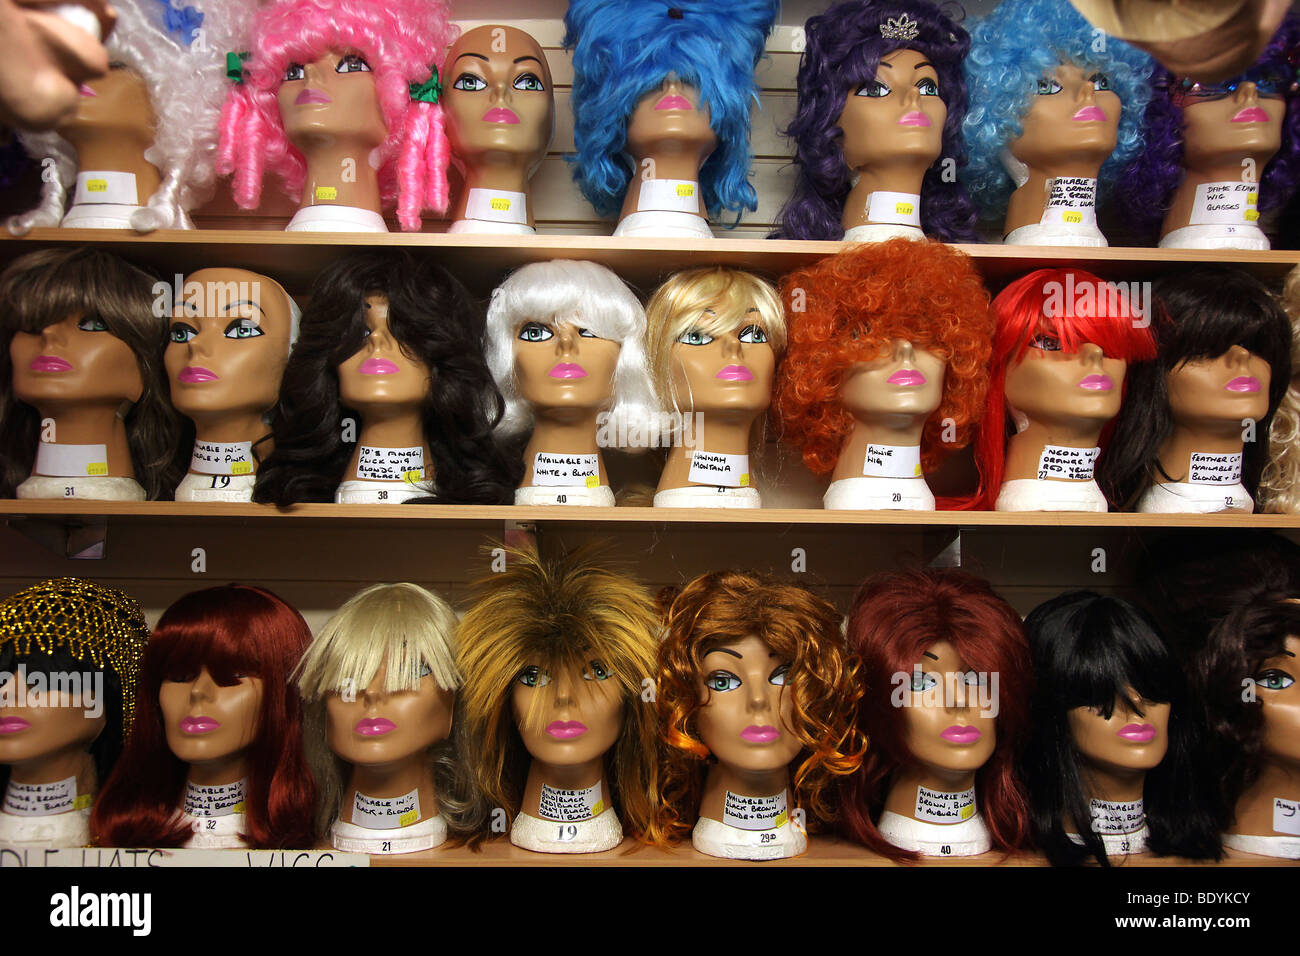 Pic by Mark Passmore 15/09/2009. Detail picture of Mannequin heads wearing colorful wigs. Stock Photo